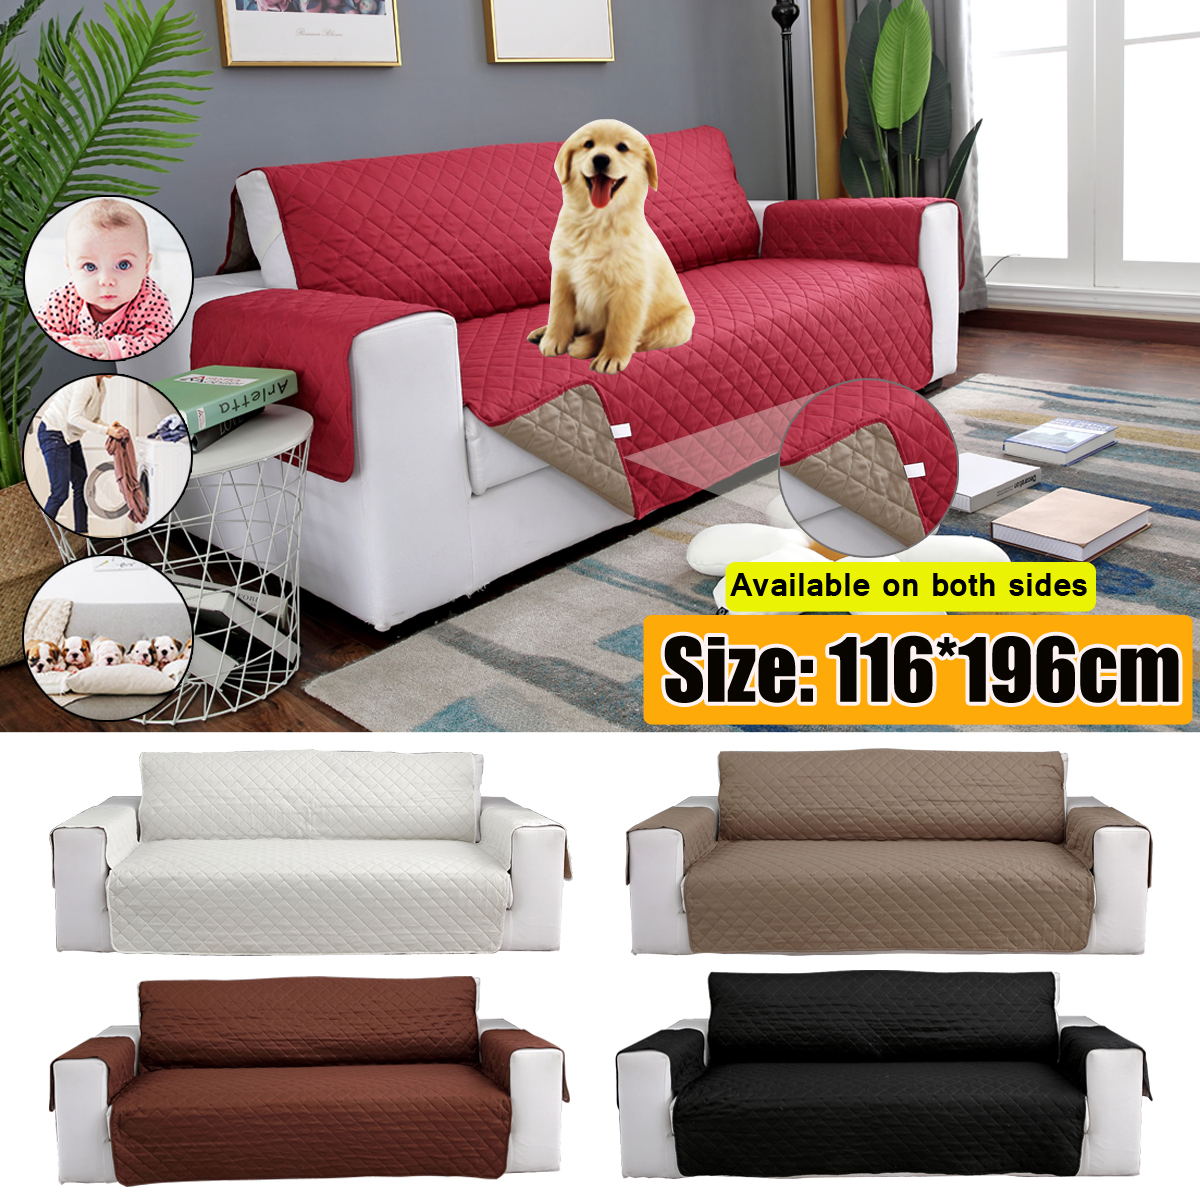 Waterproof-Seat-Printing-Pet-Sofa-Mat-Couch-Protective-Covers-Removable-With-Strap-1468136-1